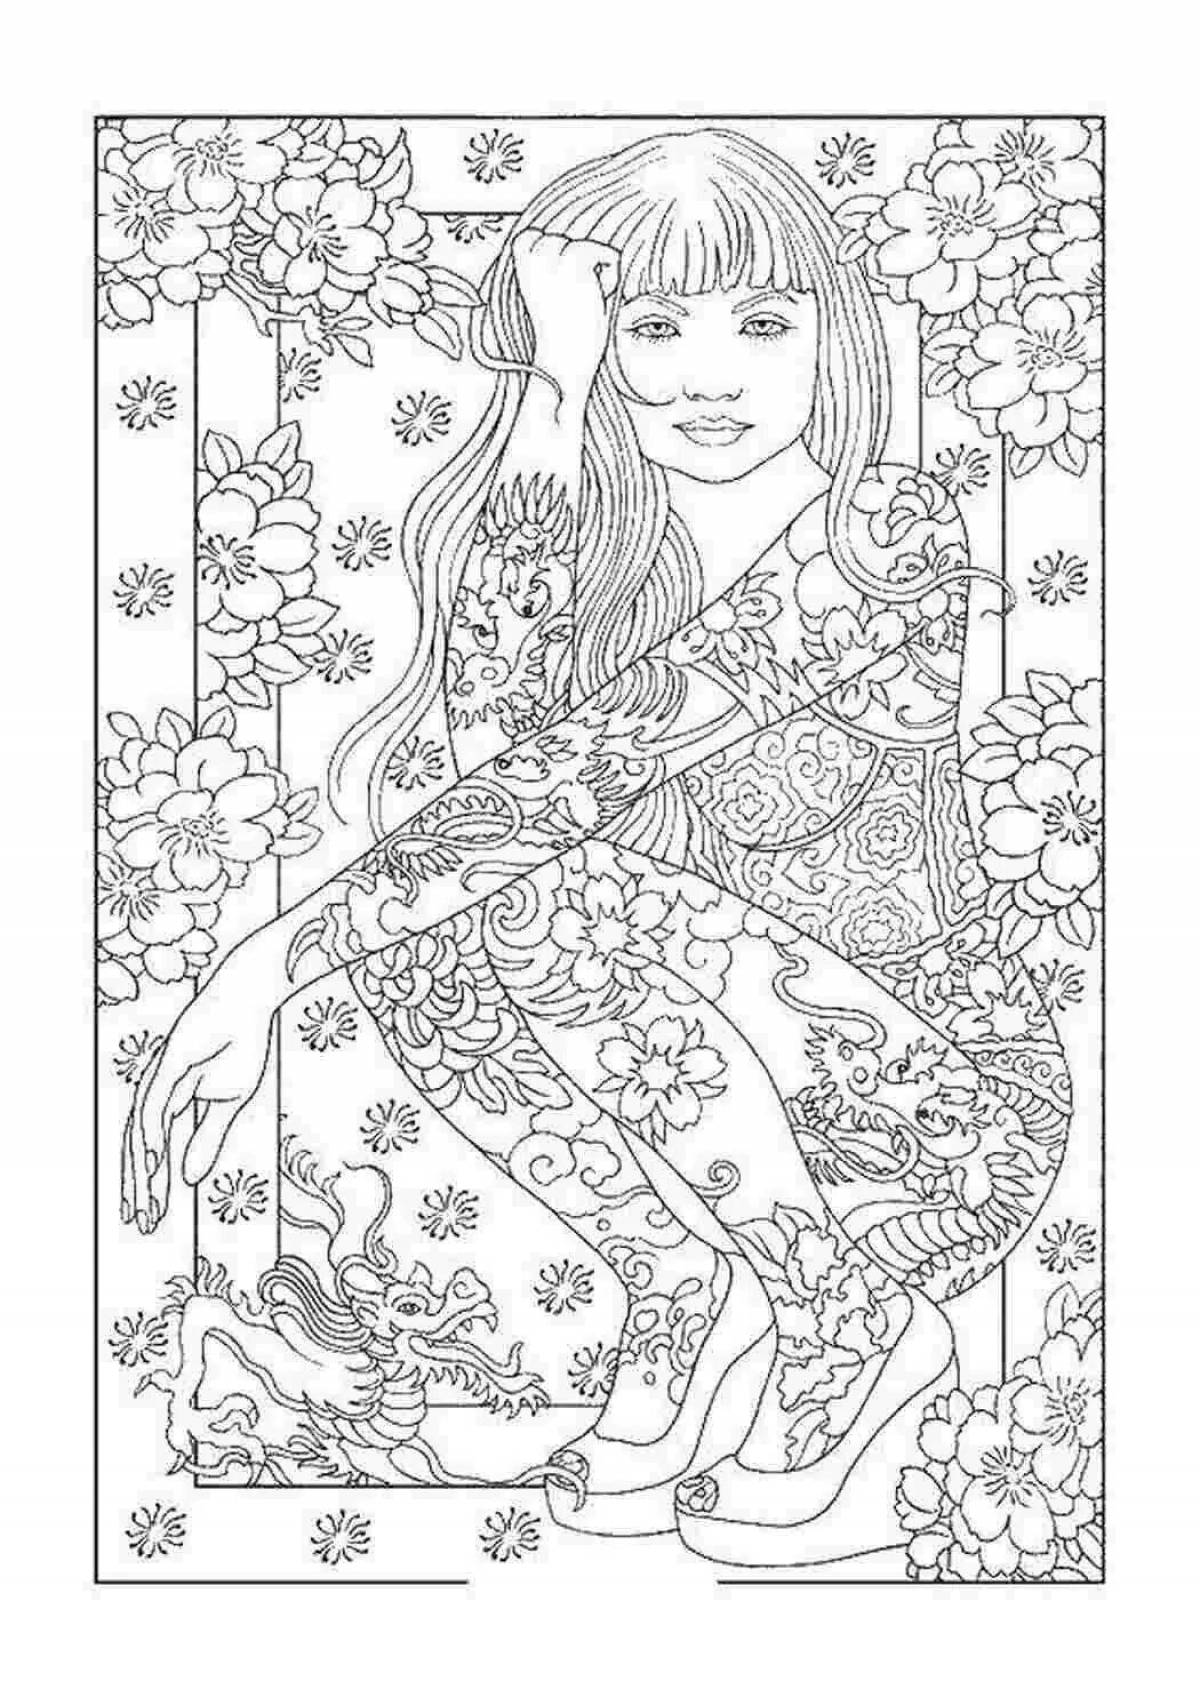 Delightful anti-stress coloring book for girls 13 years old